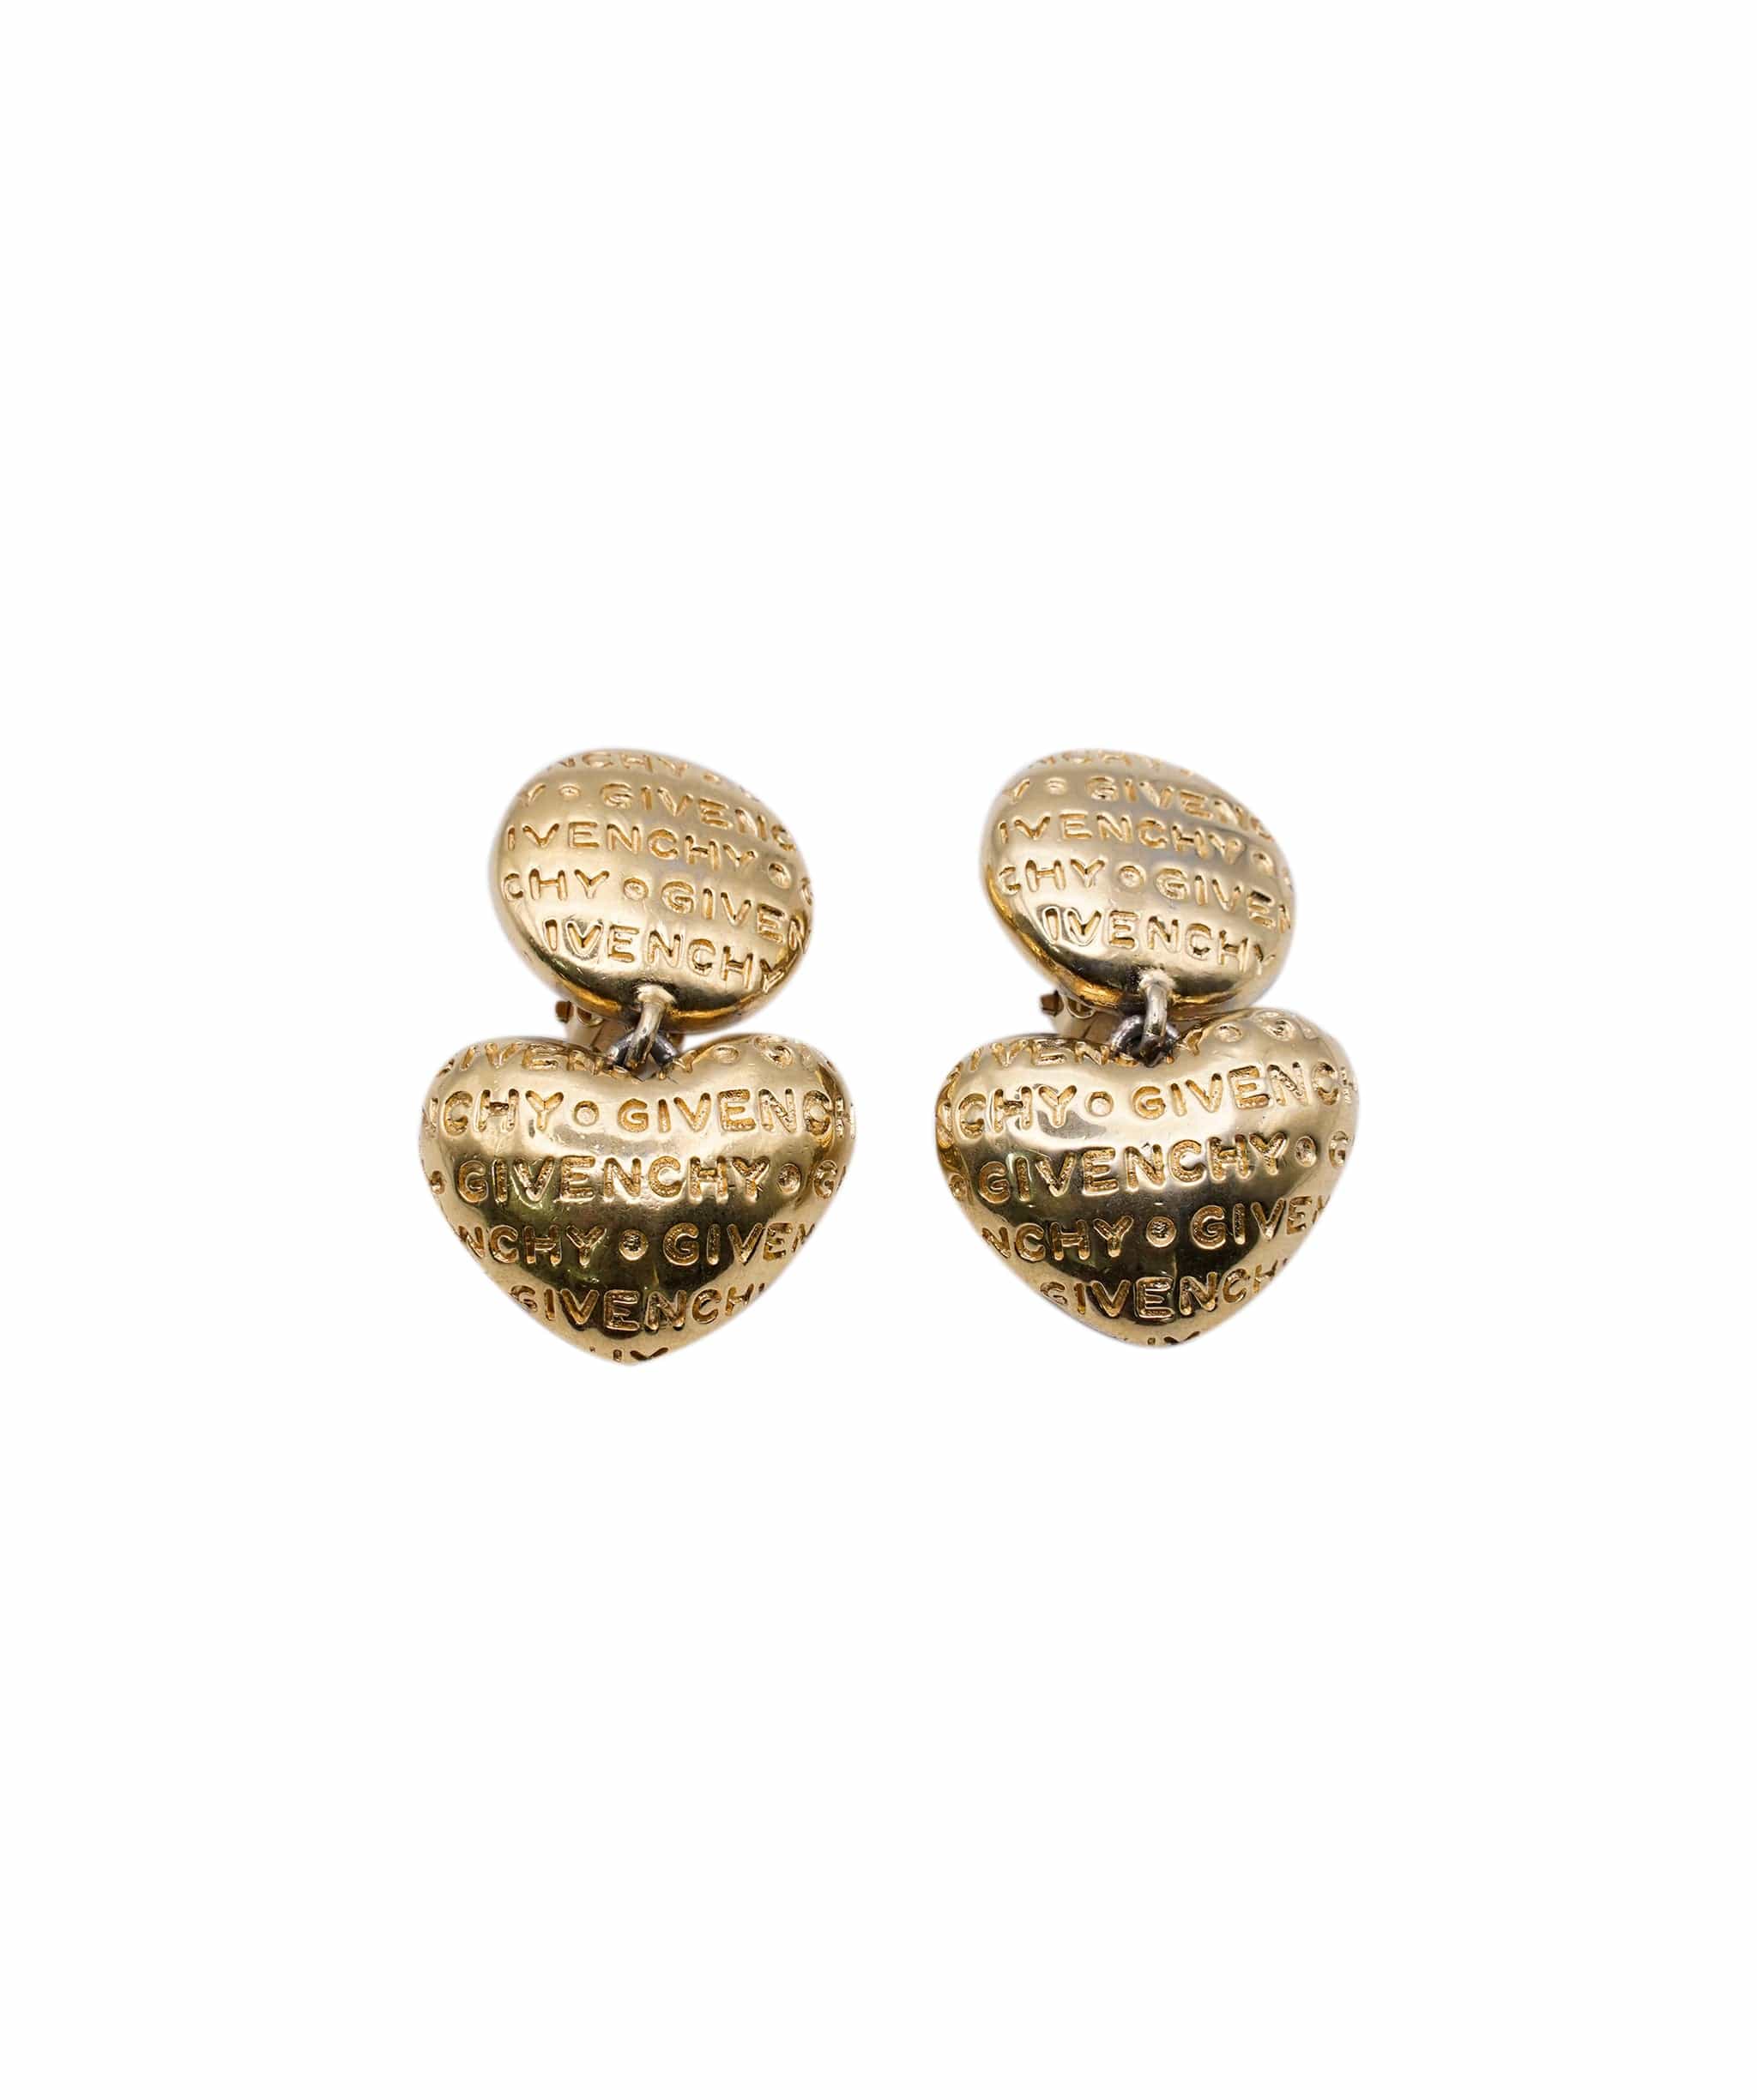 Givenchy givenchy pendant earrings AWL4520